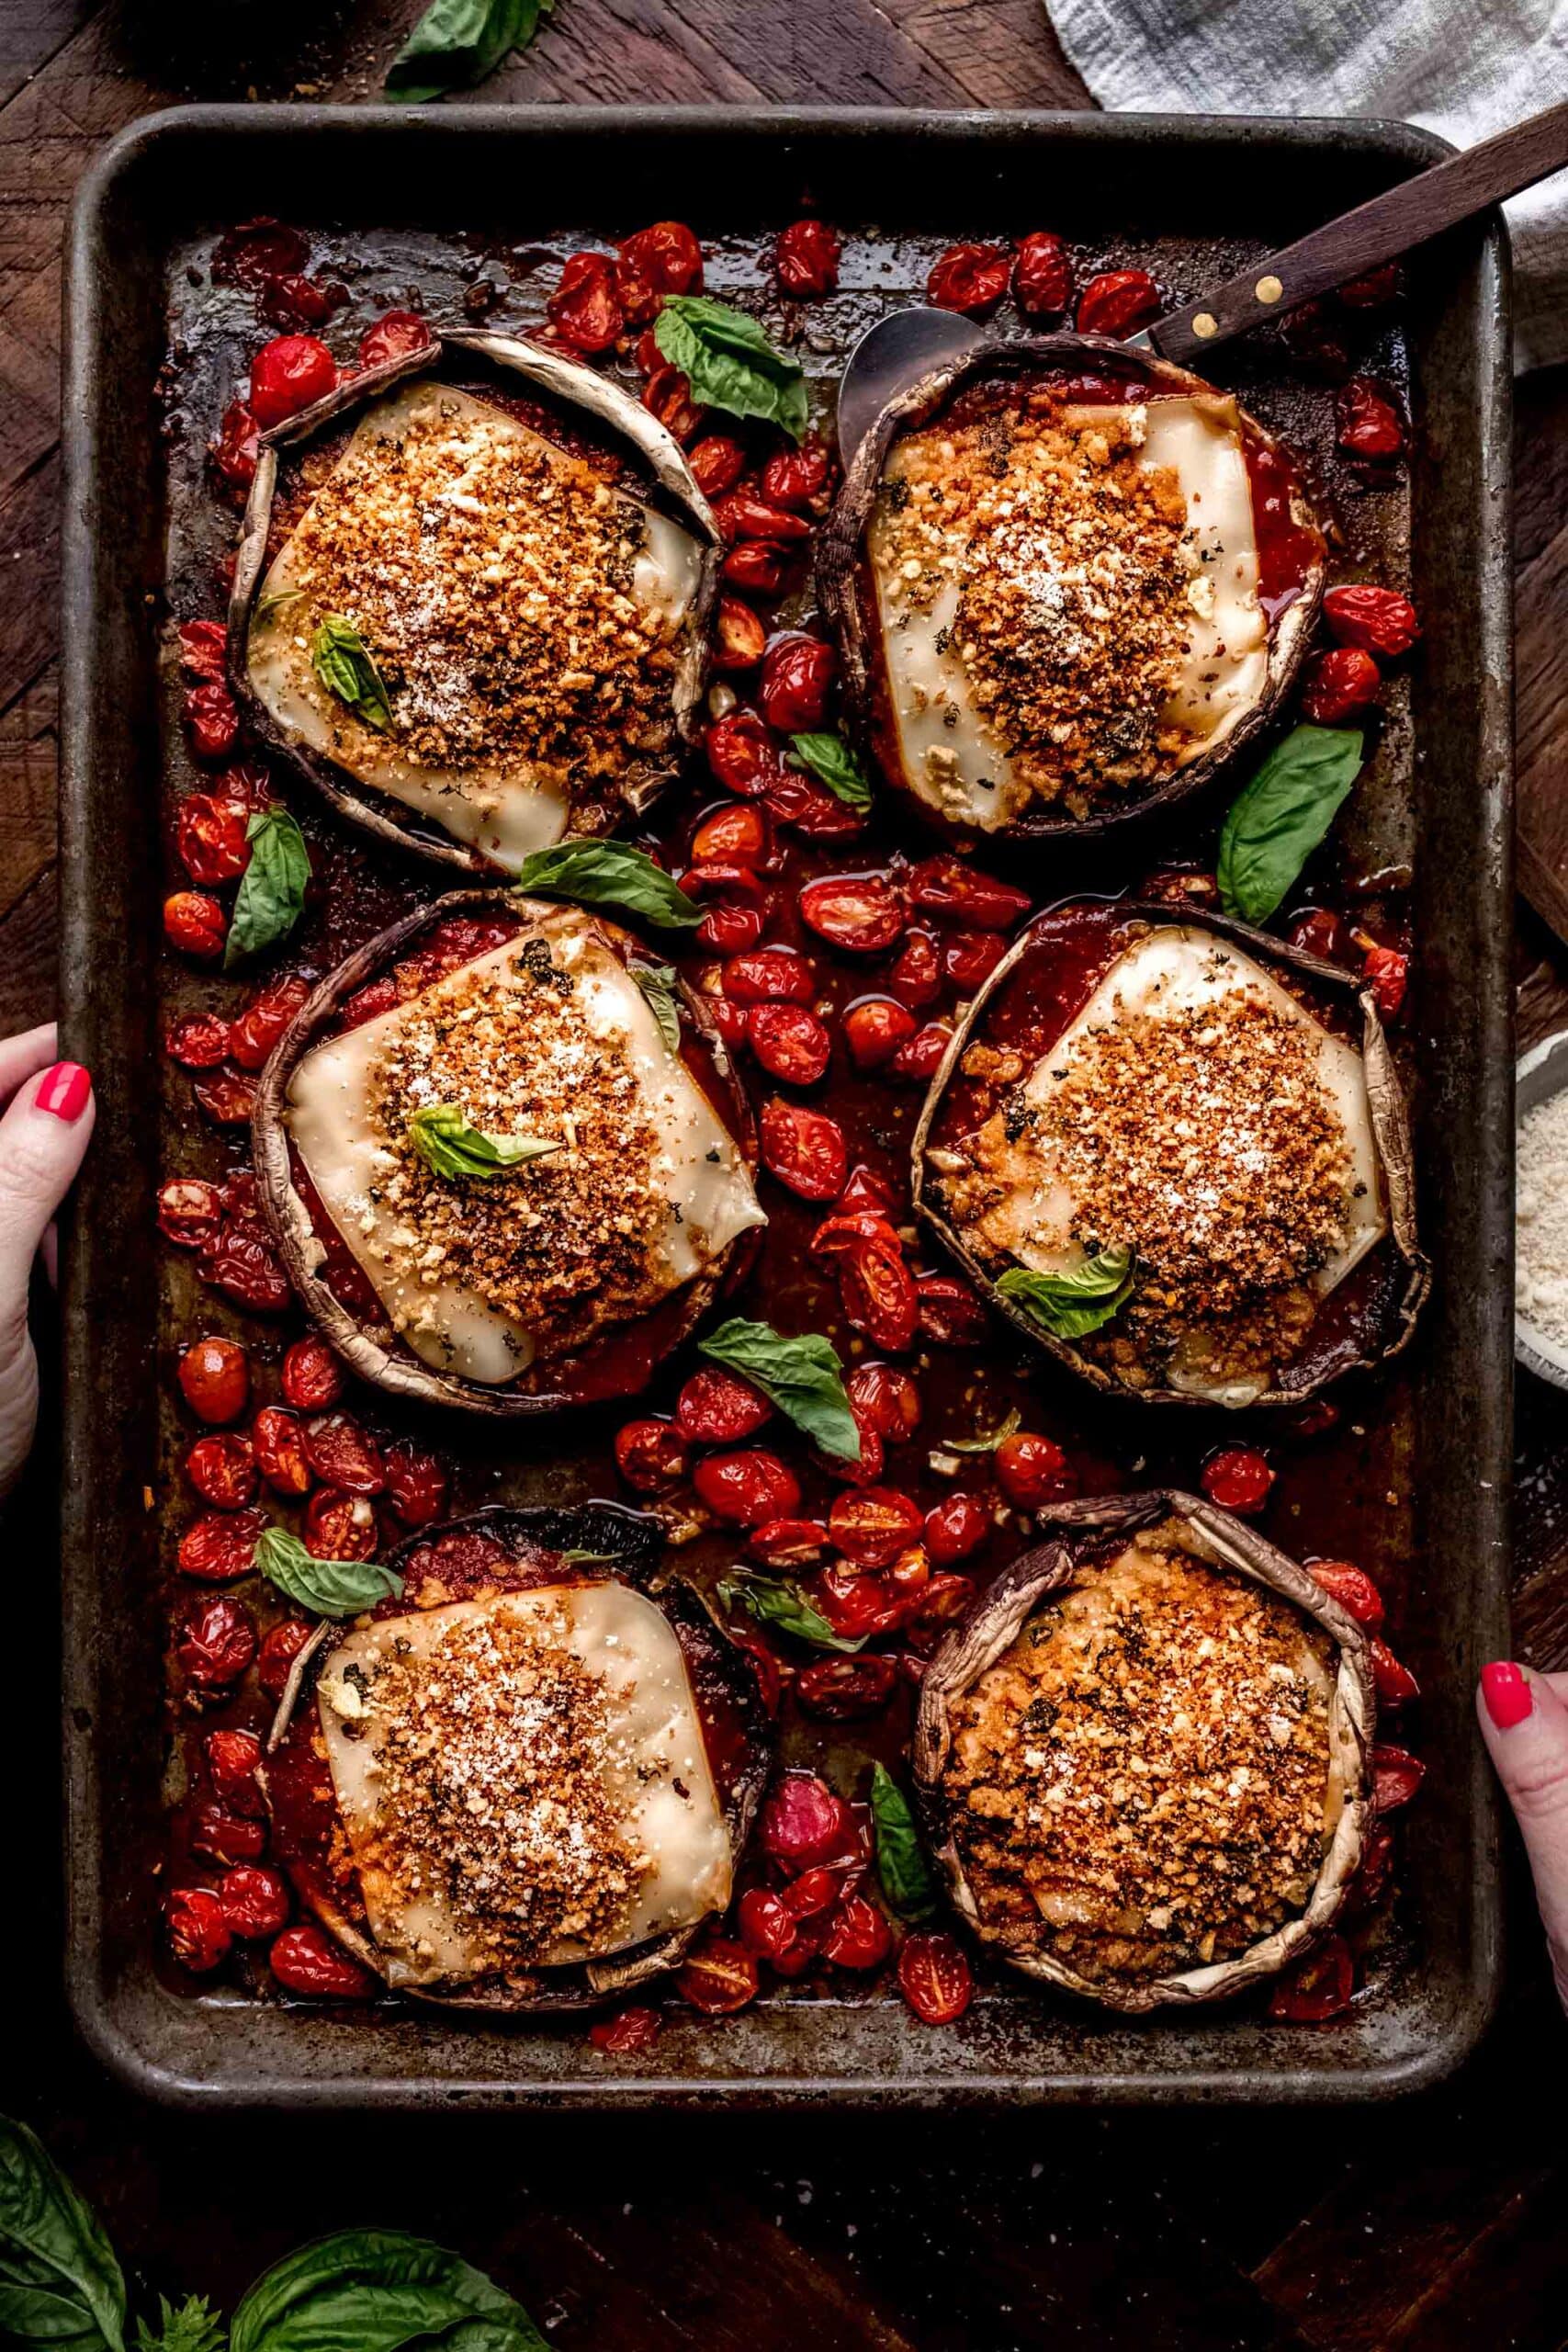 Hands holding tray of mushroom parmesan arranged on baking sheet with tomatoes scattered about.